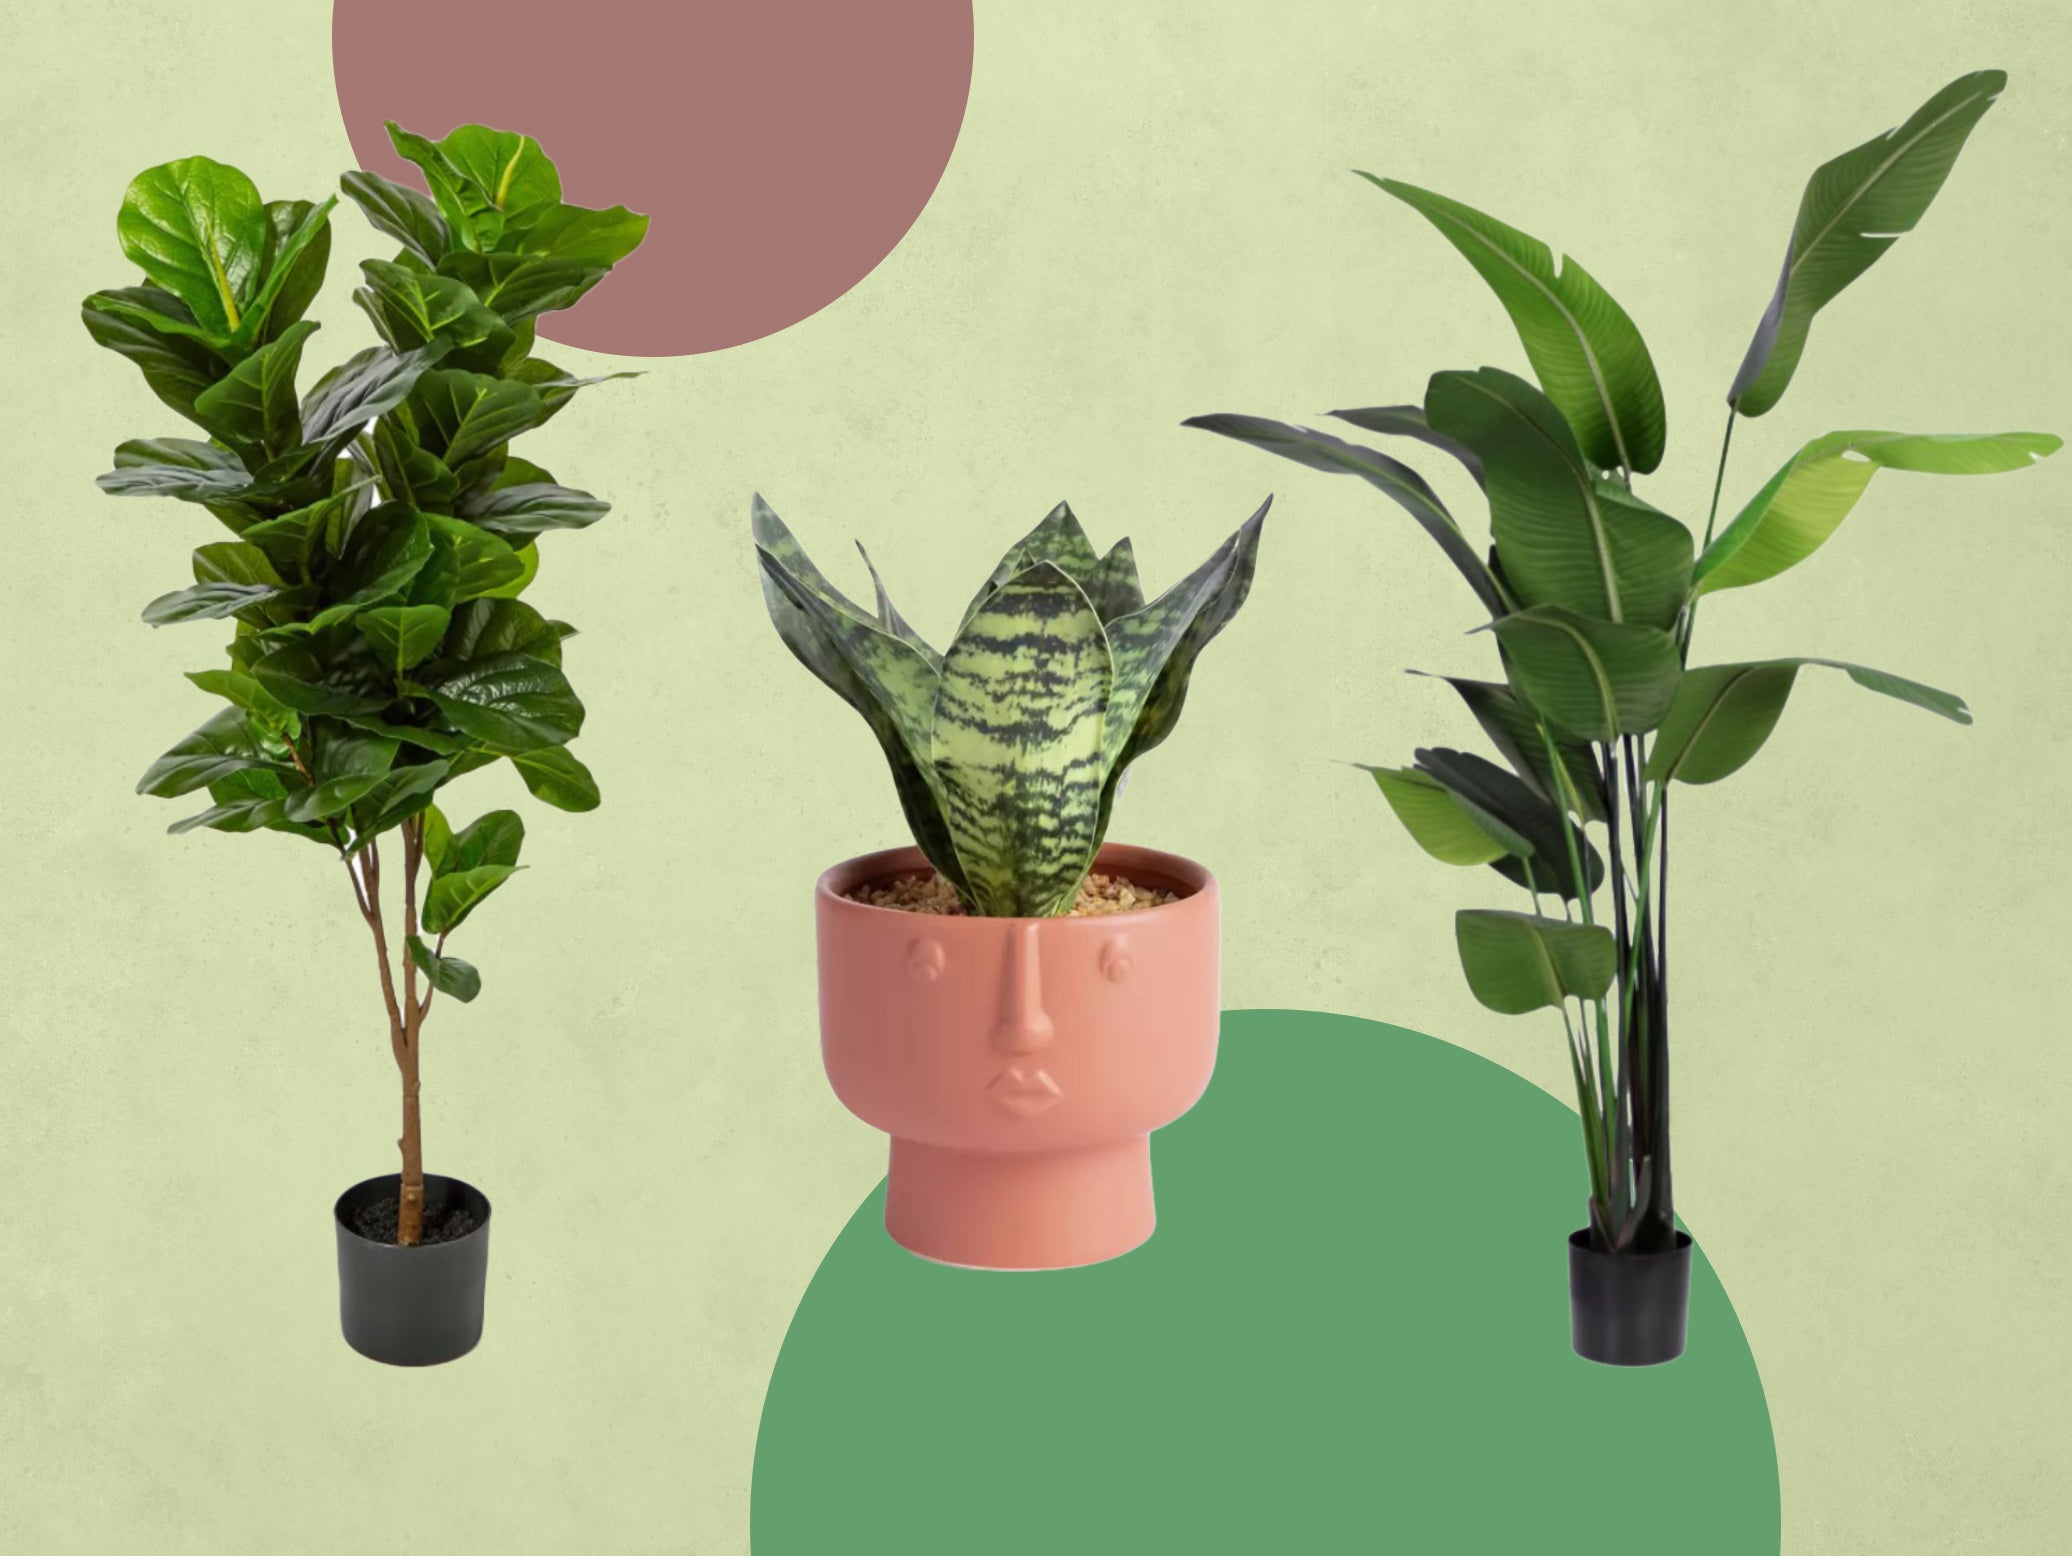 You Know What? Faux Greenery Is the Way to Go